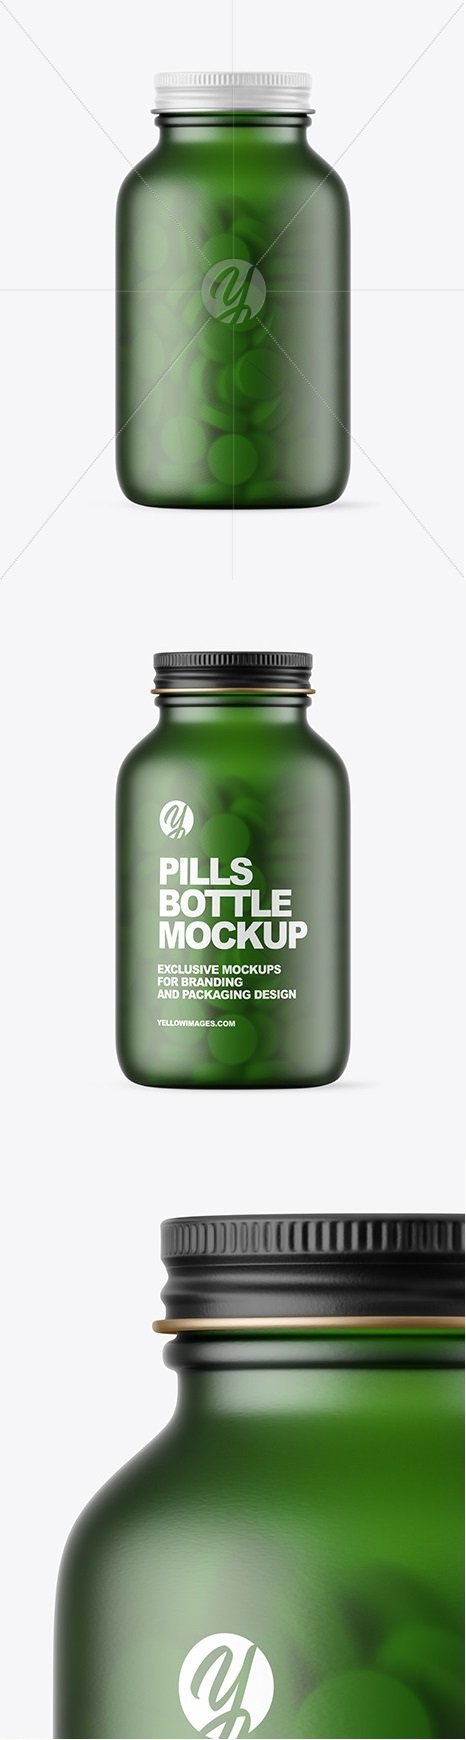 Download Download Frosted Green Glass Pills Bottle Mockup 59069 Softarchive Yellowimages Mockups